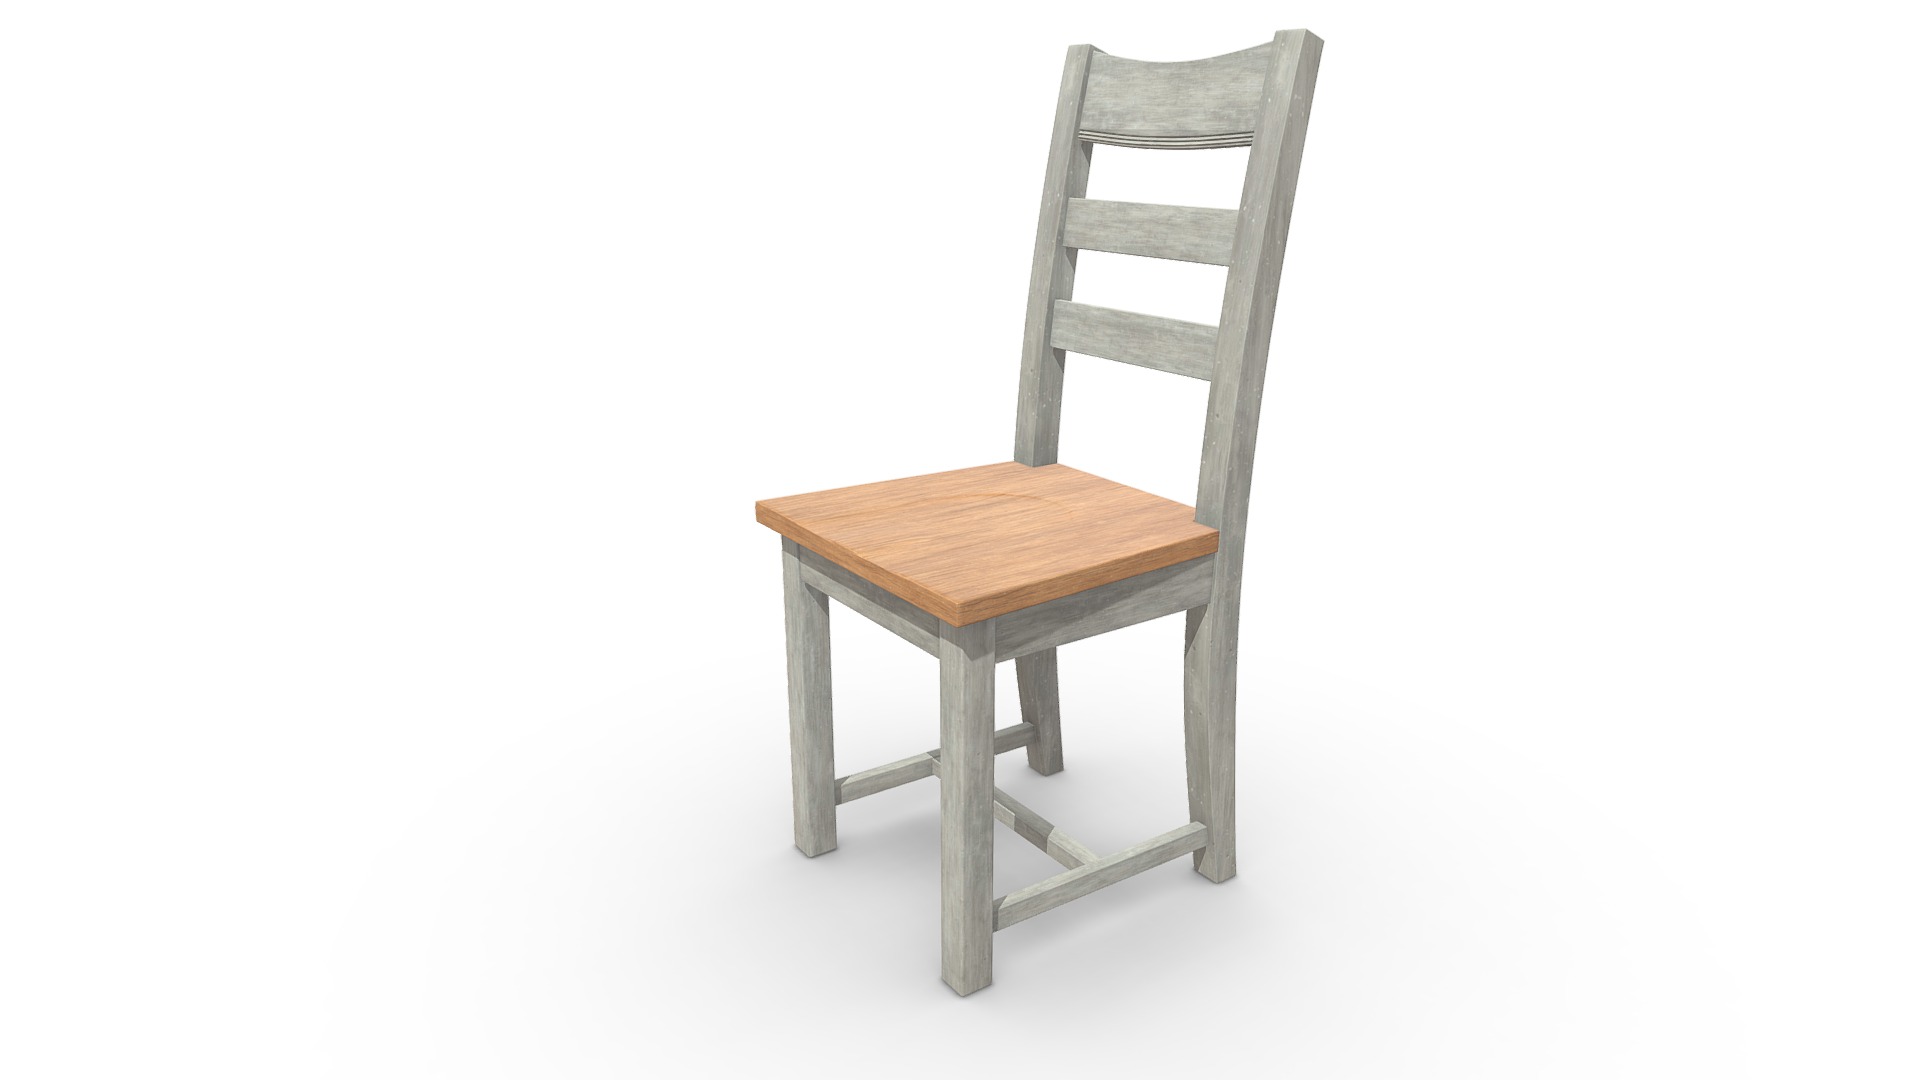 3D model Dawn Dining Chair - This is a 3D model of the Dawn Dining Chair. The 3D model is about a wooden chair with a cushion.